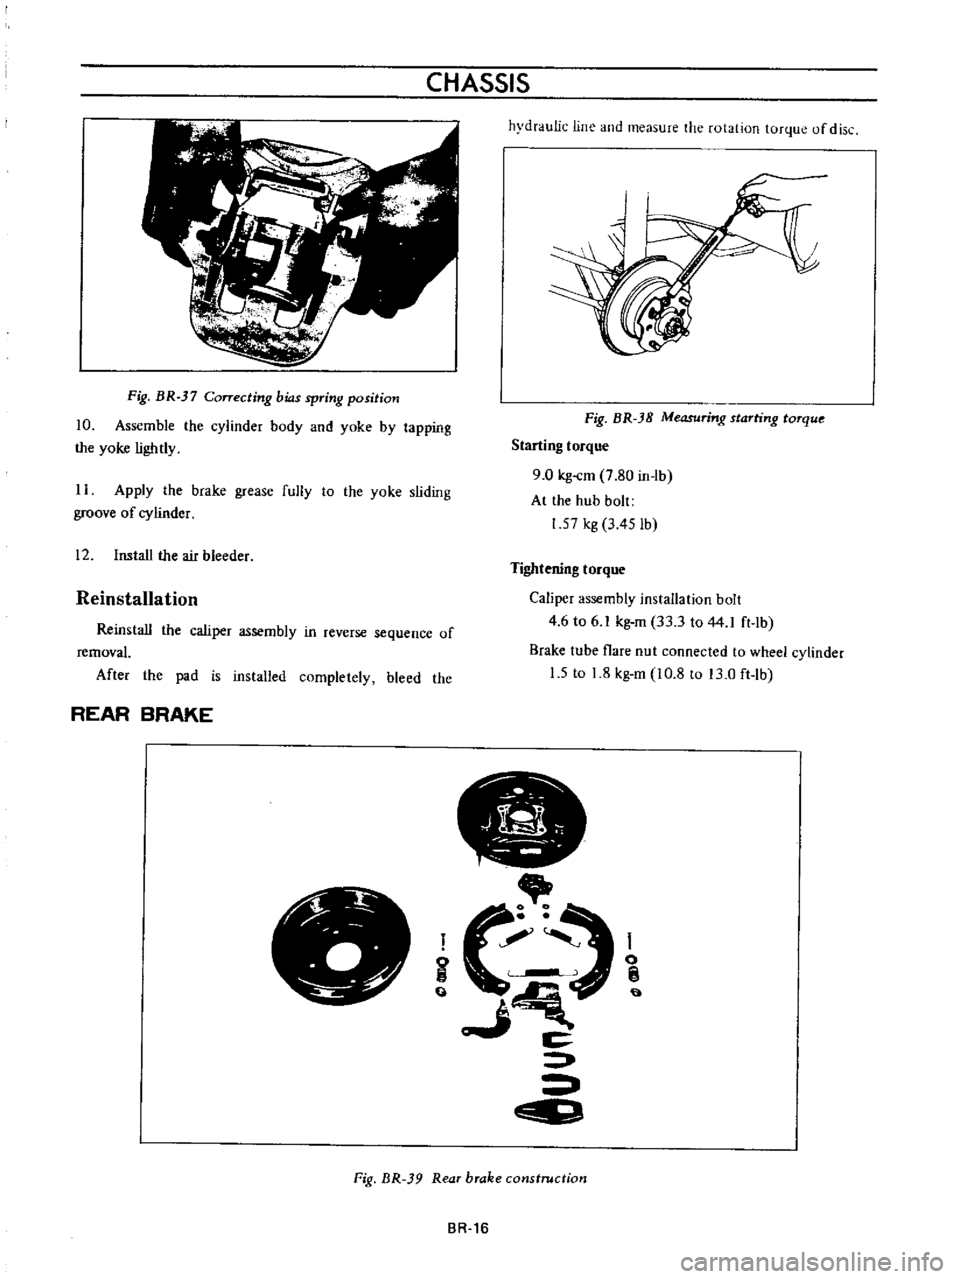 DATSUN B110 1973  Service Owners Manual 
CHASSIS

Fig 
BR 
37

Correcting 
bias

spring 
position

10

Assemble

the

cylinder 
body 
and

yoke 
by

tapping

the

yoke 
lightly

11

Apply 
the 
brake

grease 
fully 
to

the

yoke 
sliding

